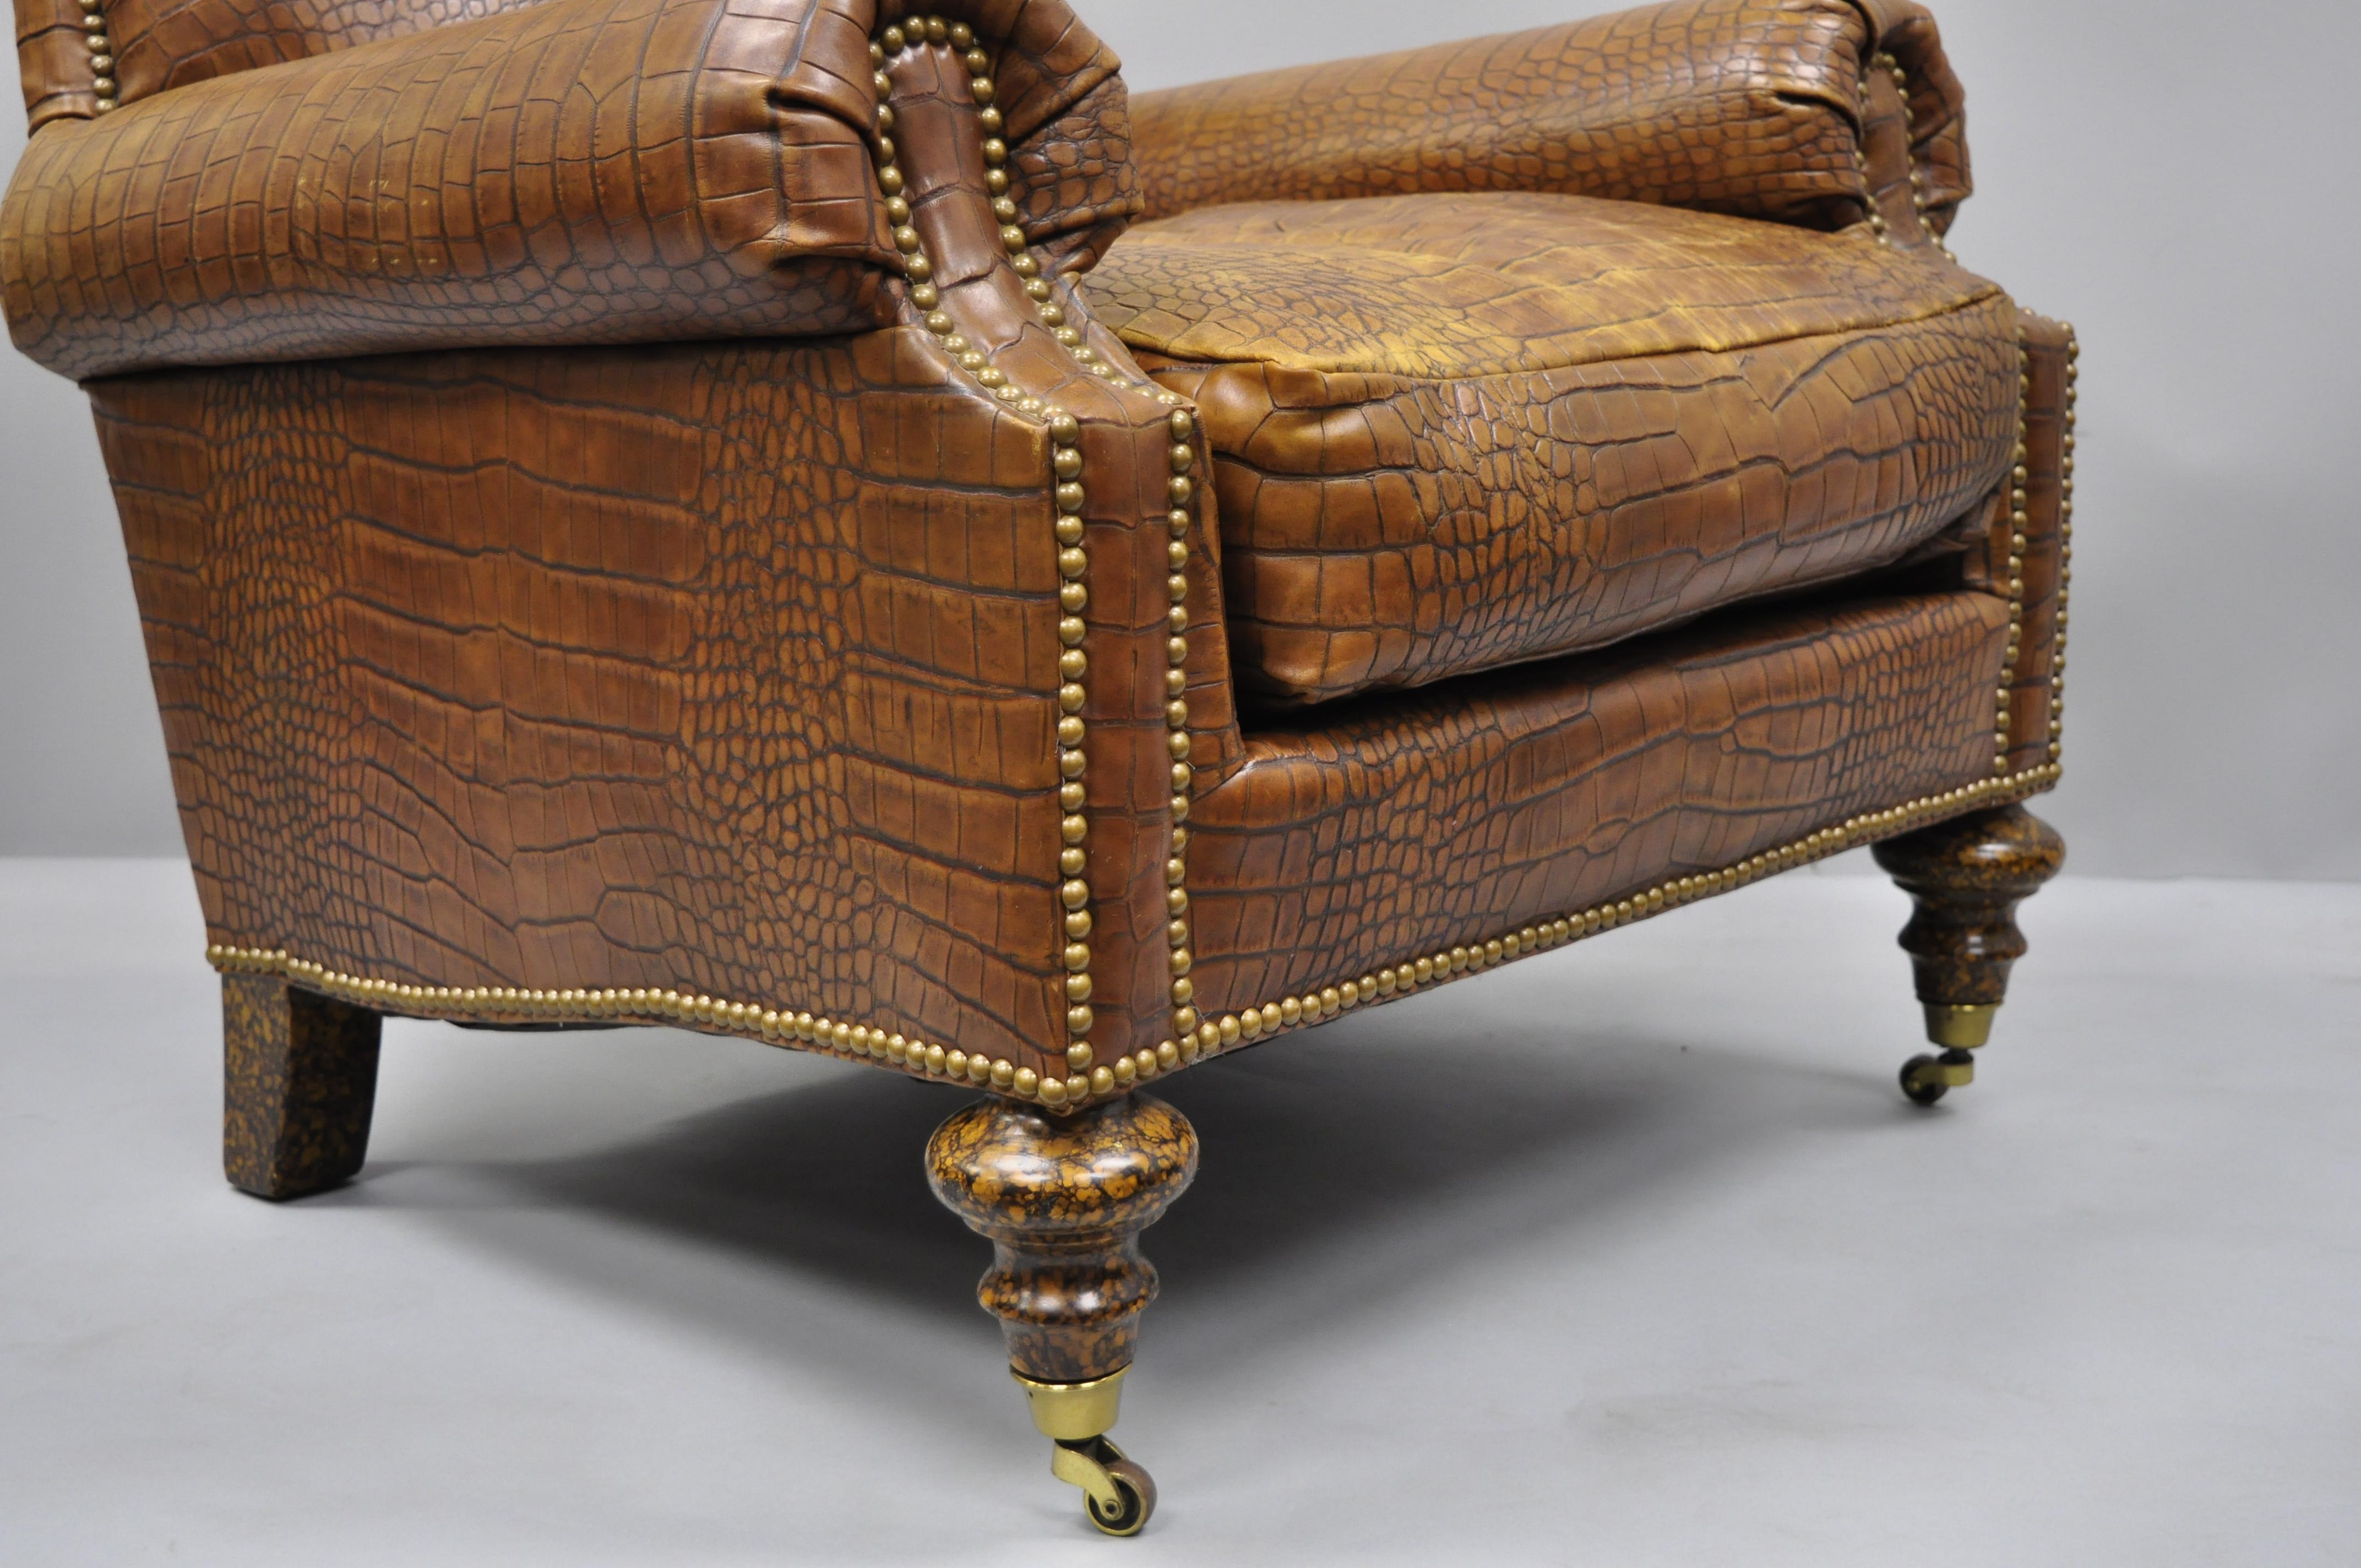 American English Regency Brown Leather Gator Embossed Lounge Chair & Ottoman by Pearson